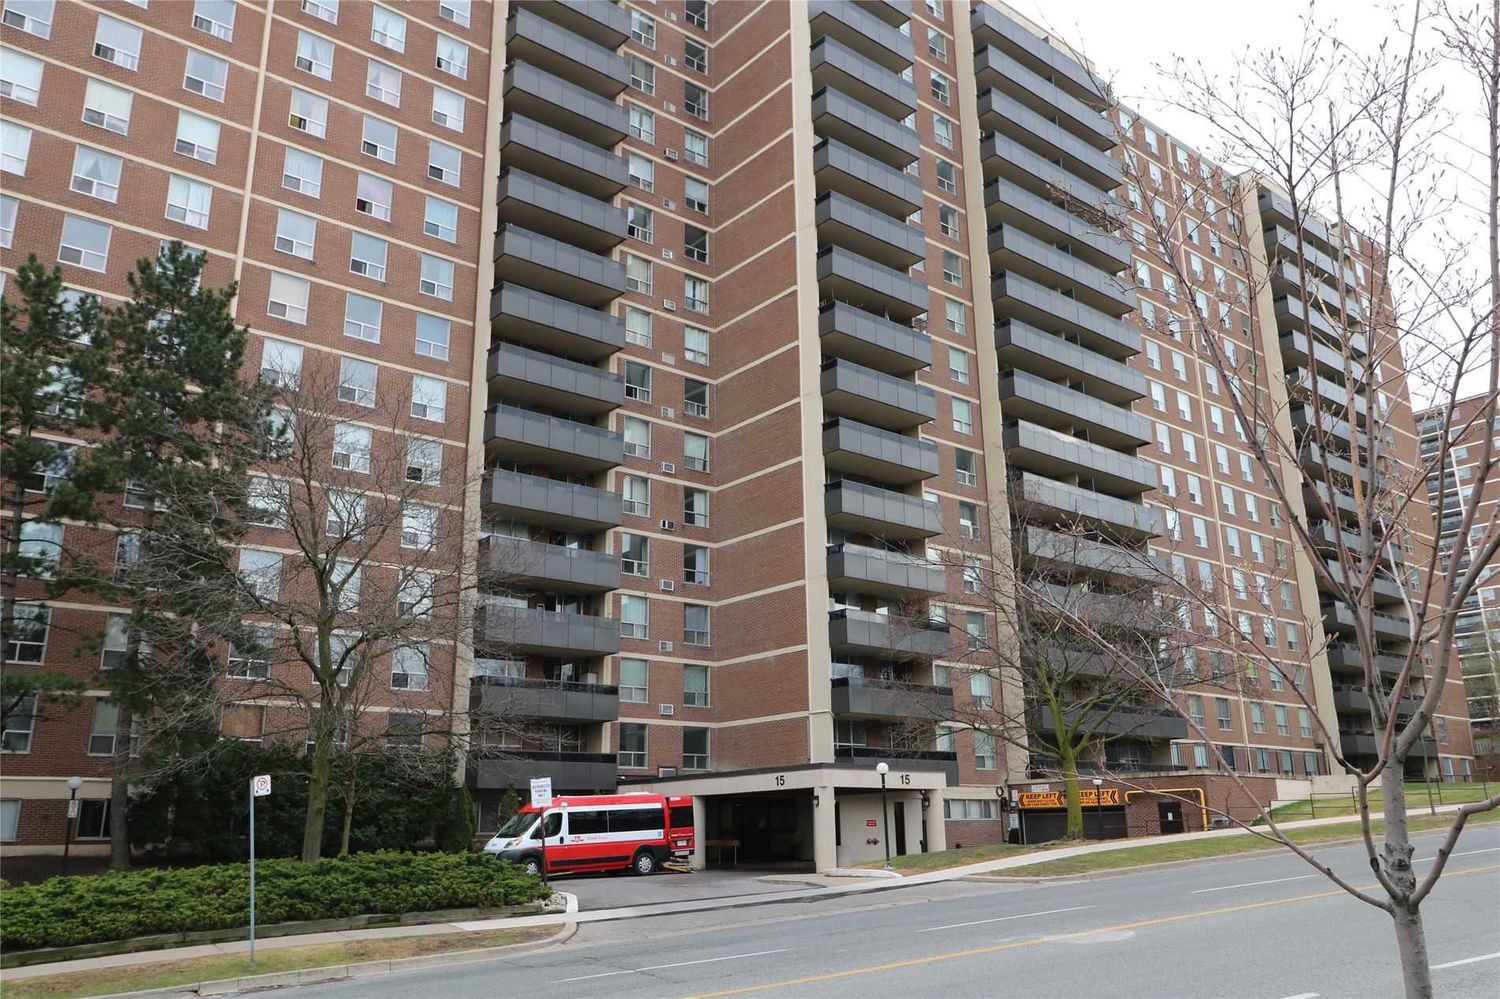 15 La Rose Avenue. Humber Hill Towers Condos is located in  Etobicoke, Toronto - image #2 of 2